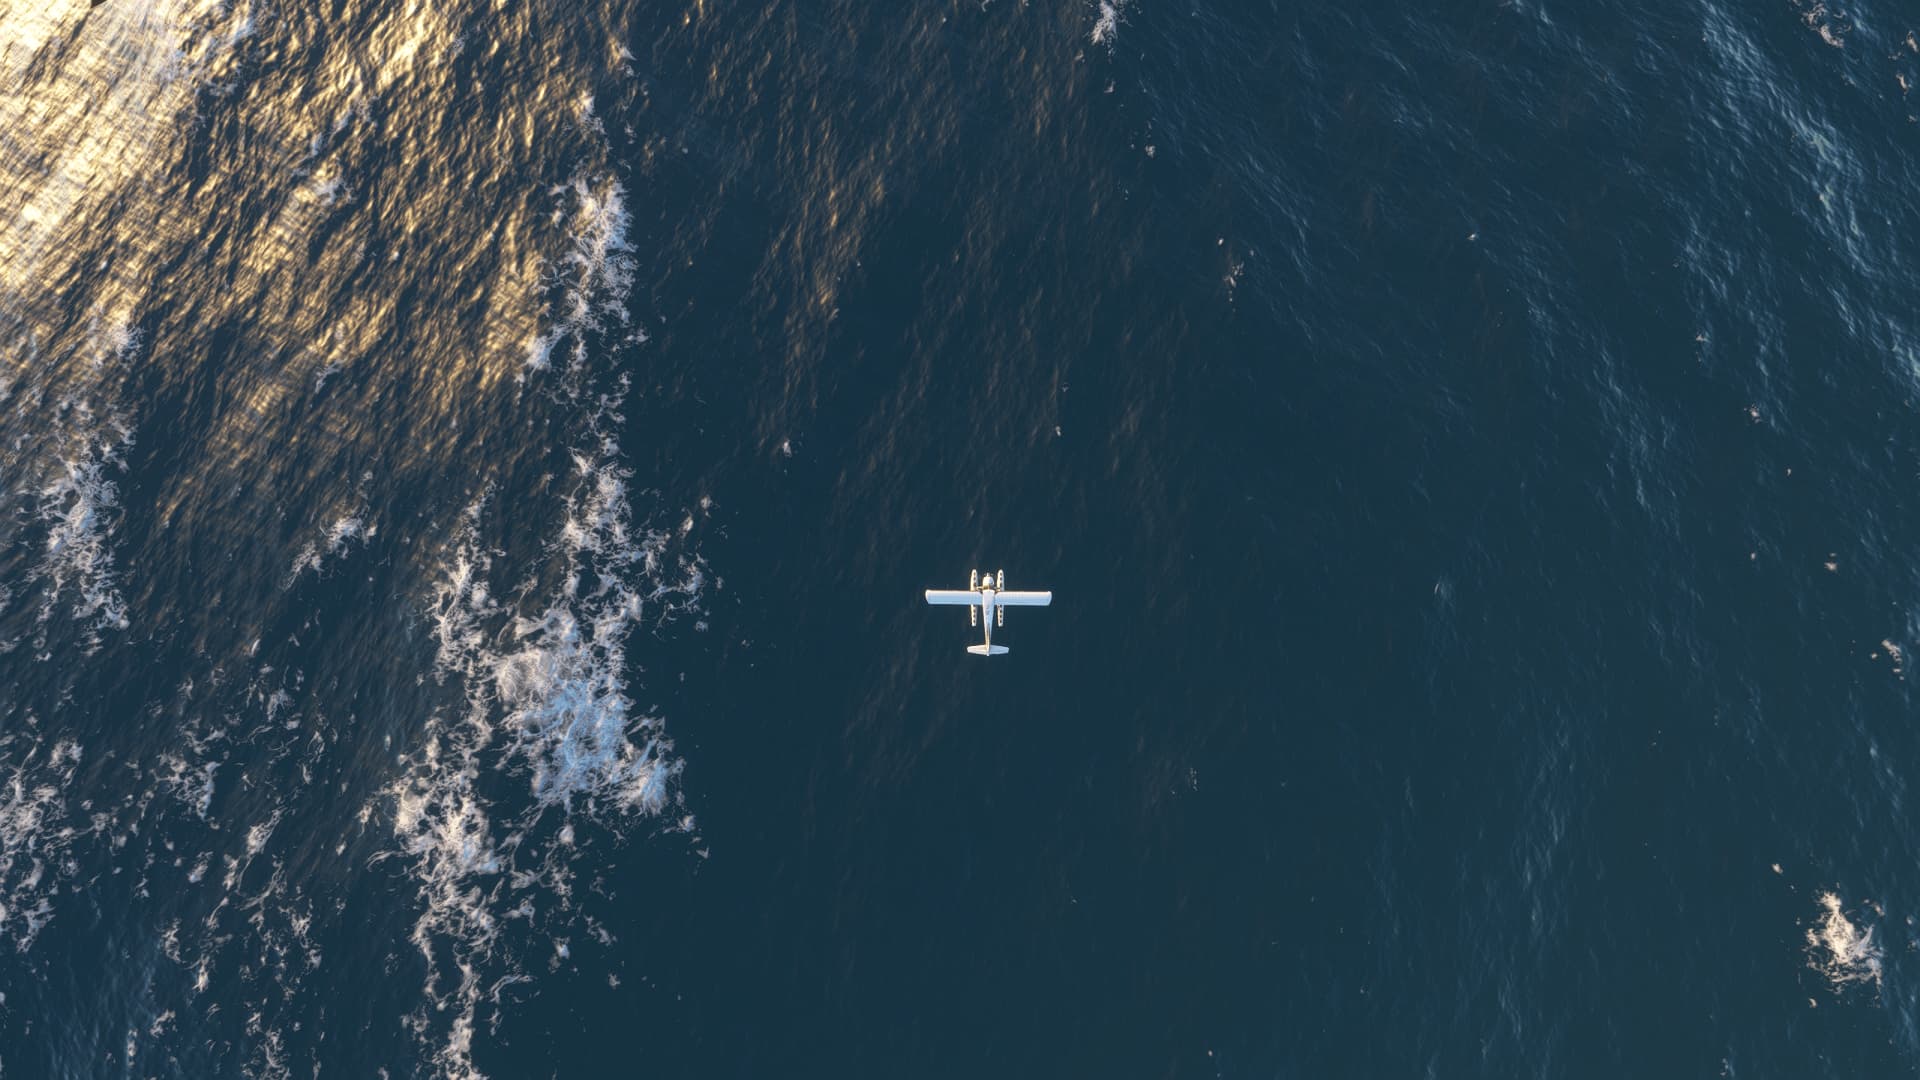 Top down view of a single-engine GA plane equipped with floats flying over the open sea.